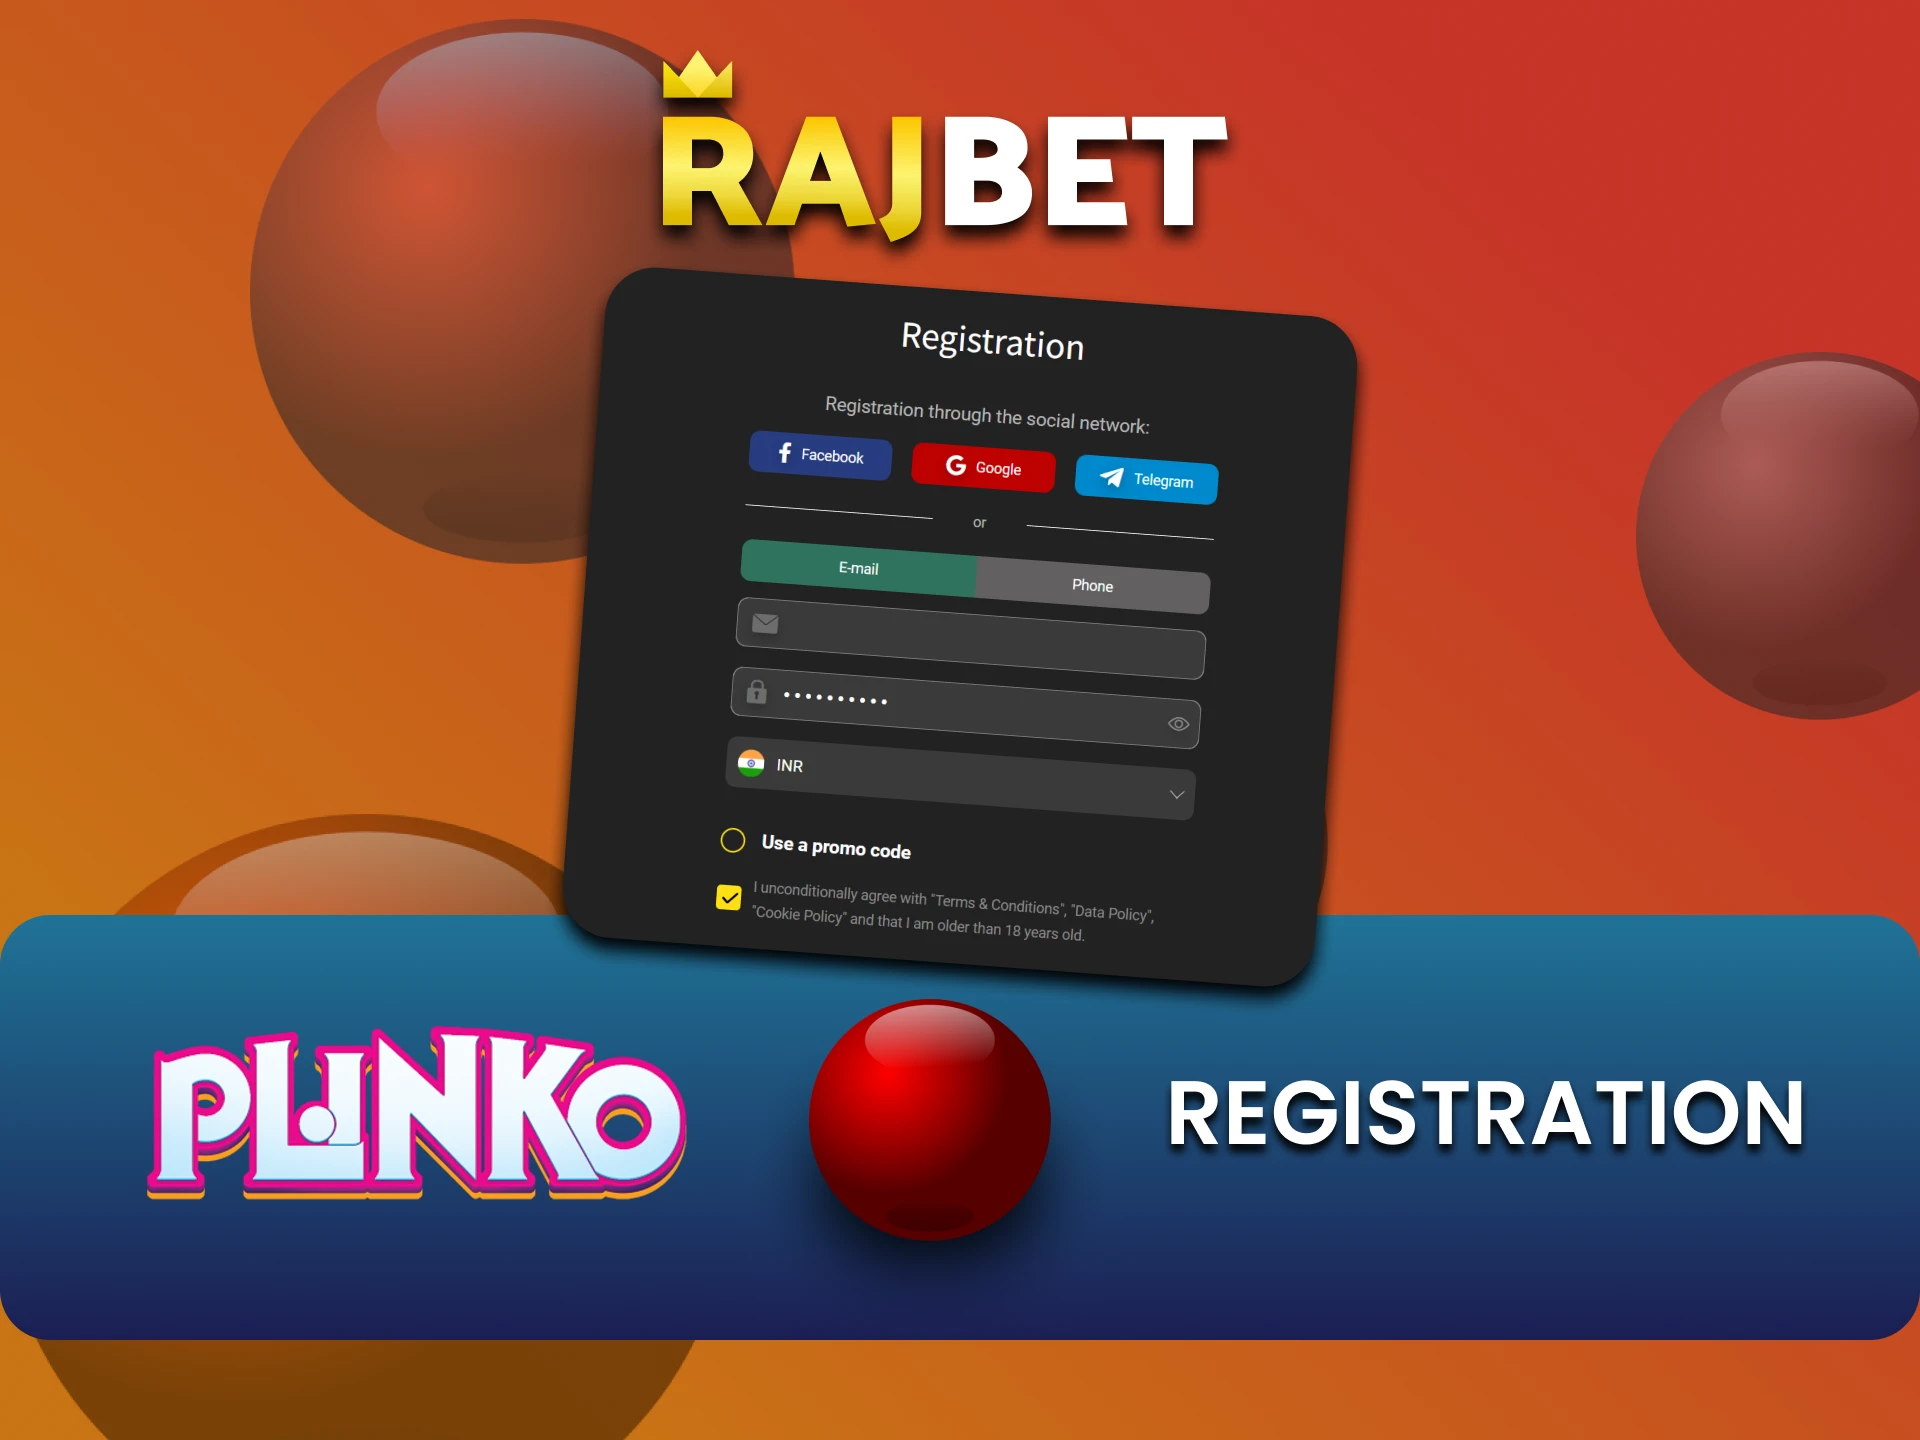 We will tell you how to register on the Rajbet website to play Plinko.